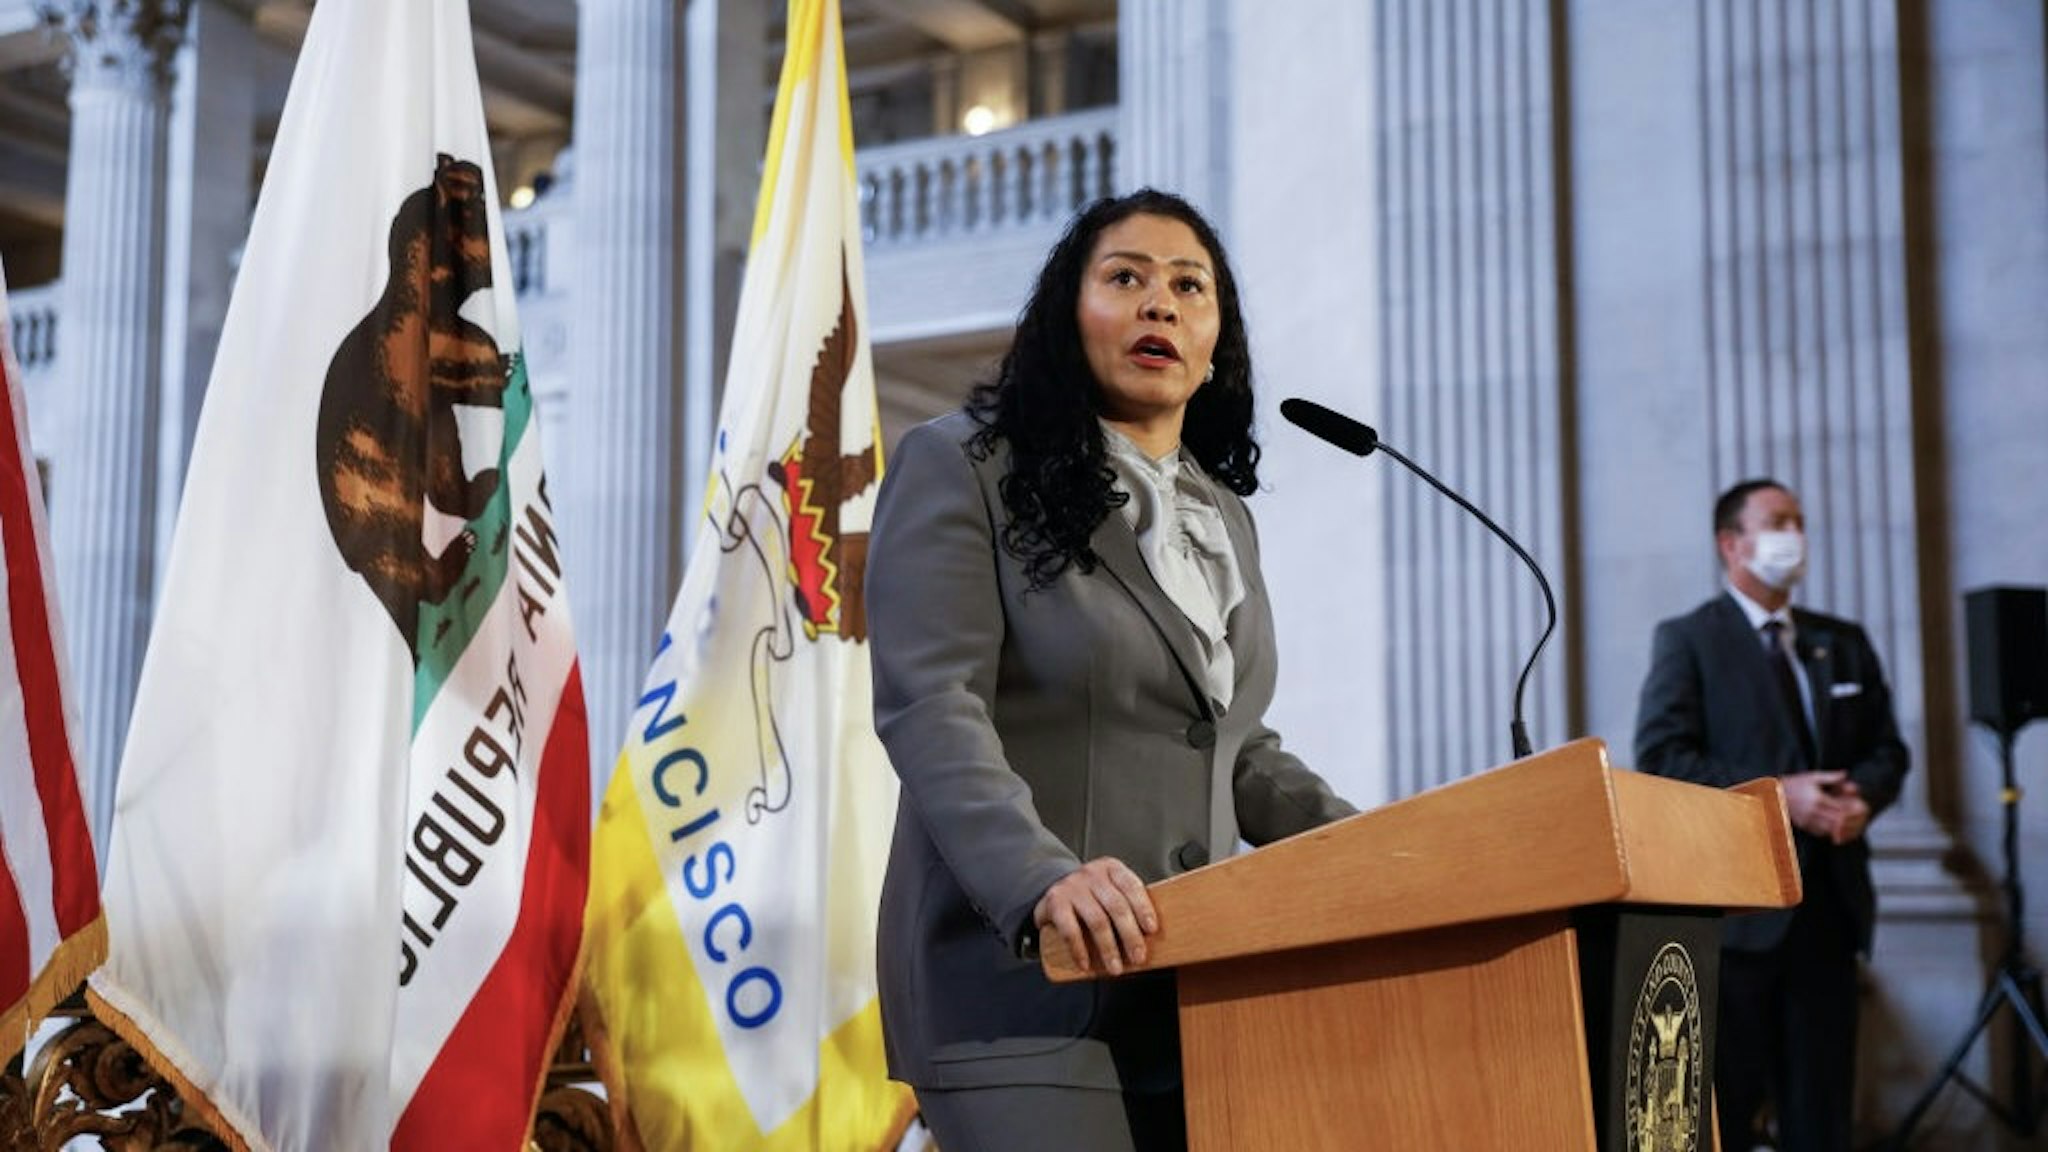 SFChronicleBreed SAN FRANCISCO, CA - FEB. 16: San Francisco Mayor London Breed speaks at a press conference regarding the next steps she will be taking to replace three school board members who were successfully recalled at City Hall on Wednesday, Feb. 16, 2022 in San Francisco, California. (Gabrielle Lurie/The San Francisco Chronicle via Getty Images) San Francisco Chronicle/Hearst Newspapers via Getty Images / Contributor